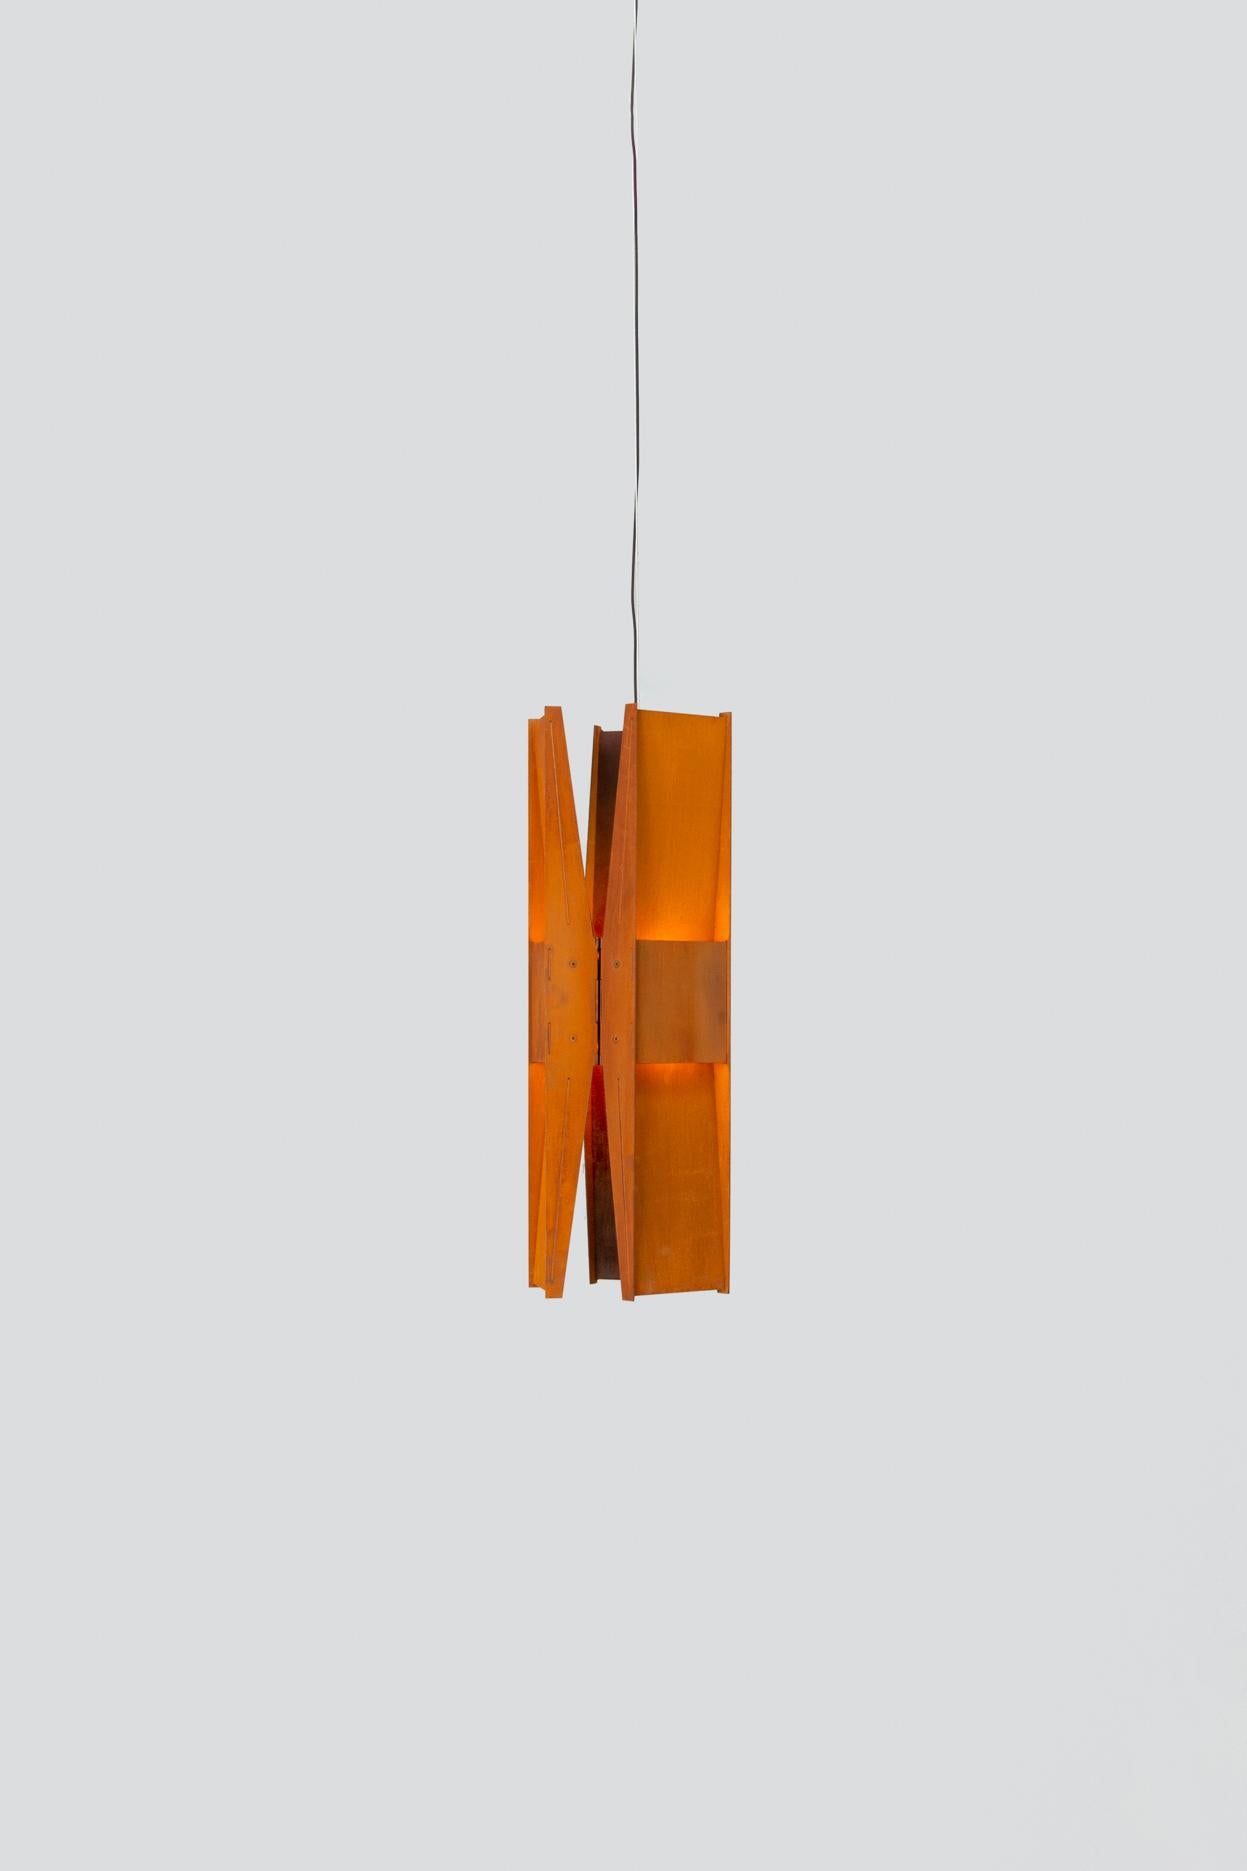 Contemporary Pendant Lamp 'Vector 3'

Model shown: Weathered Steel

DIMENSIONS
H. 58 cm x D. 22 cm / H. 22.75” x D. 8.5”

Adjustable cord length: 244 cm / 96”
* CUSTOM LENGTH AVAILABLE

ELECTRICAL
Input Voltage: 110–120V, 220–240V, 110–277V  

Power